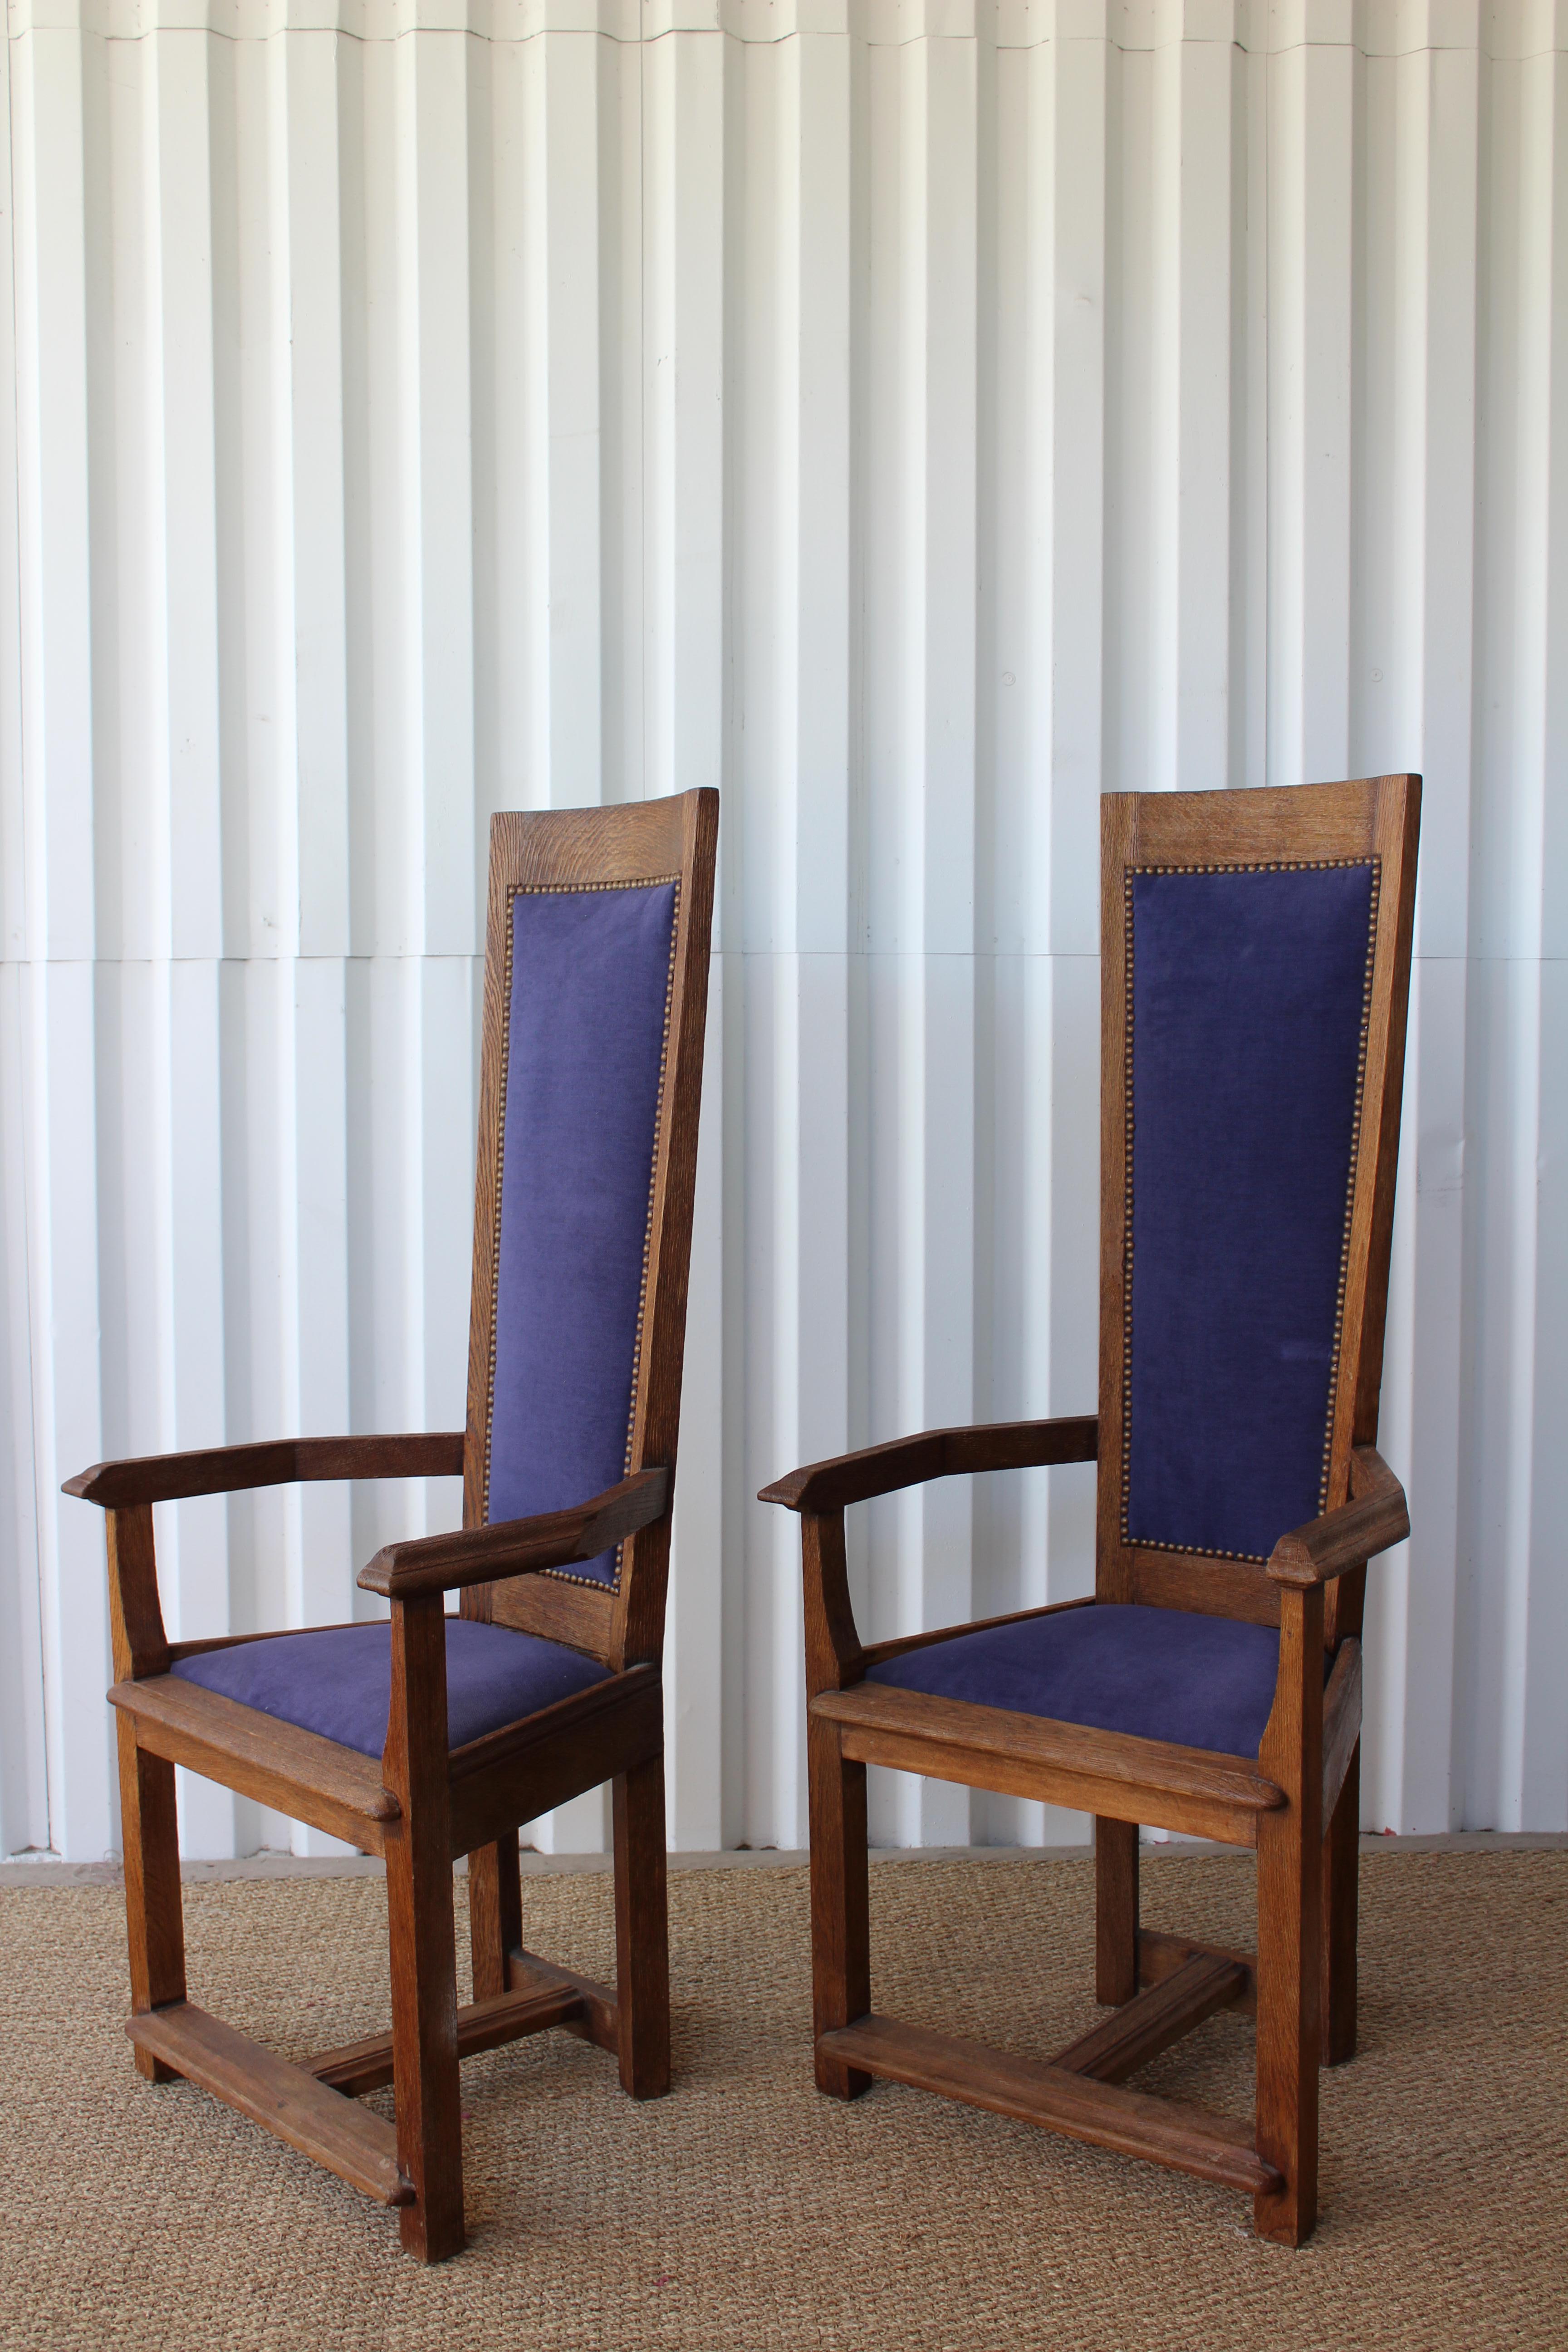 Pair of vintage hall chairs, France, 1940s. The oak frames have been sand blasted to expose the oak grain. New dark periwinkle chenille upholstery with antique brass nailhead details. Sold only as a pair.